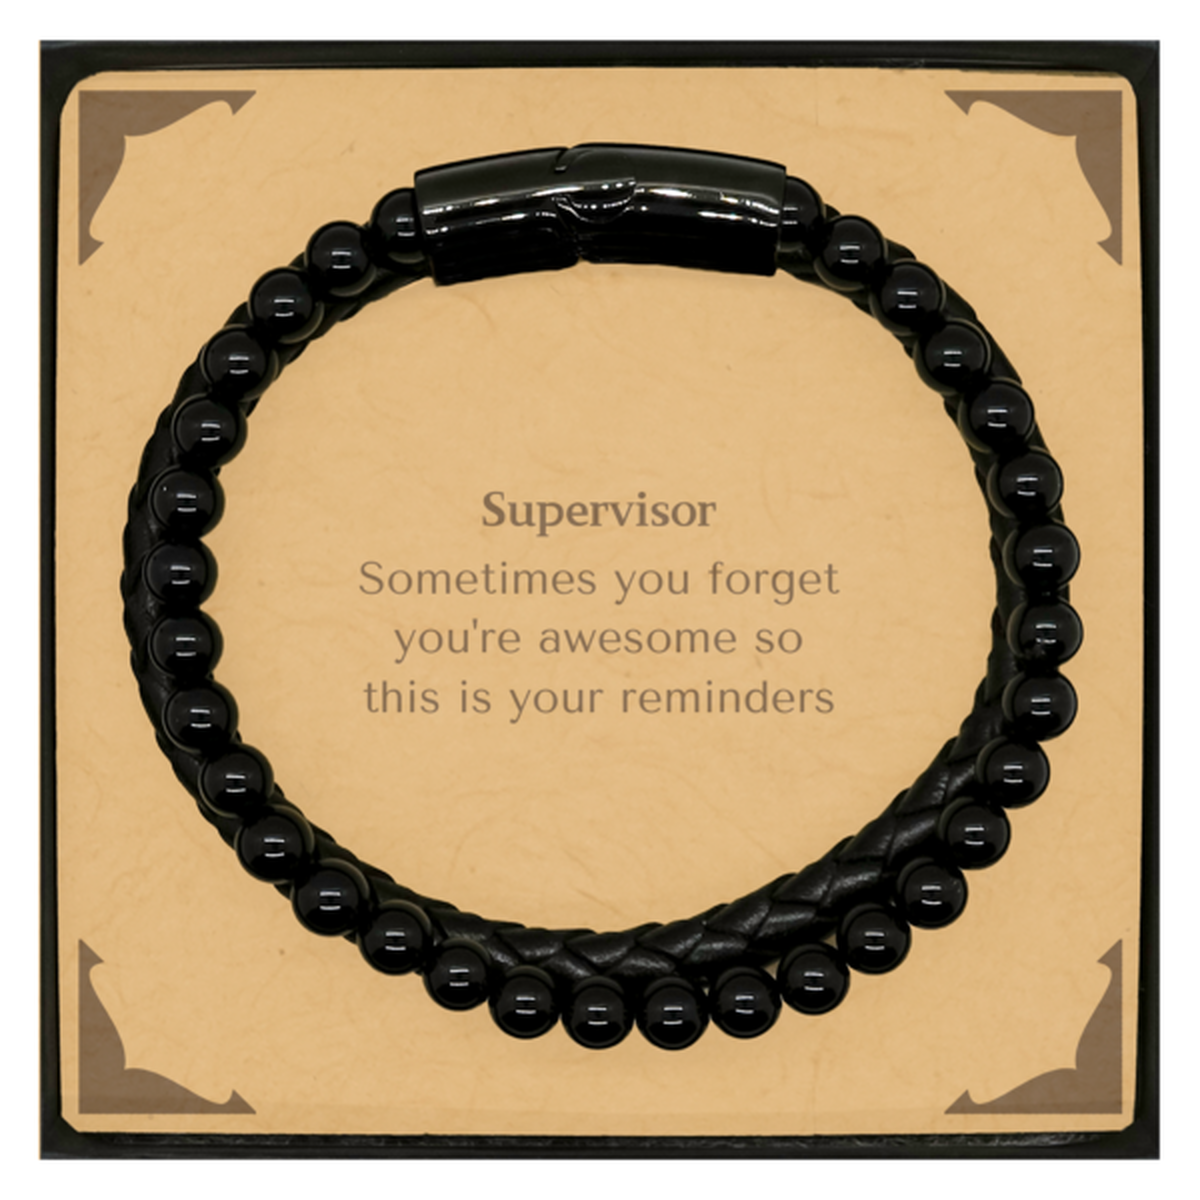 Sentimental Supervisor Stone Leather Bracelets, Supervisor Sometimes you forget you're awesome so this is your reminders, Graduation Christmas Birthday Gifts for Supervisor, Men, Women, Coworkers